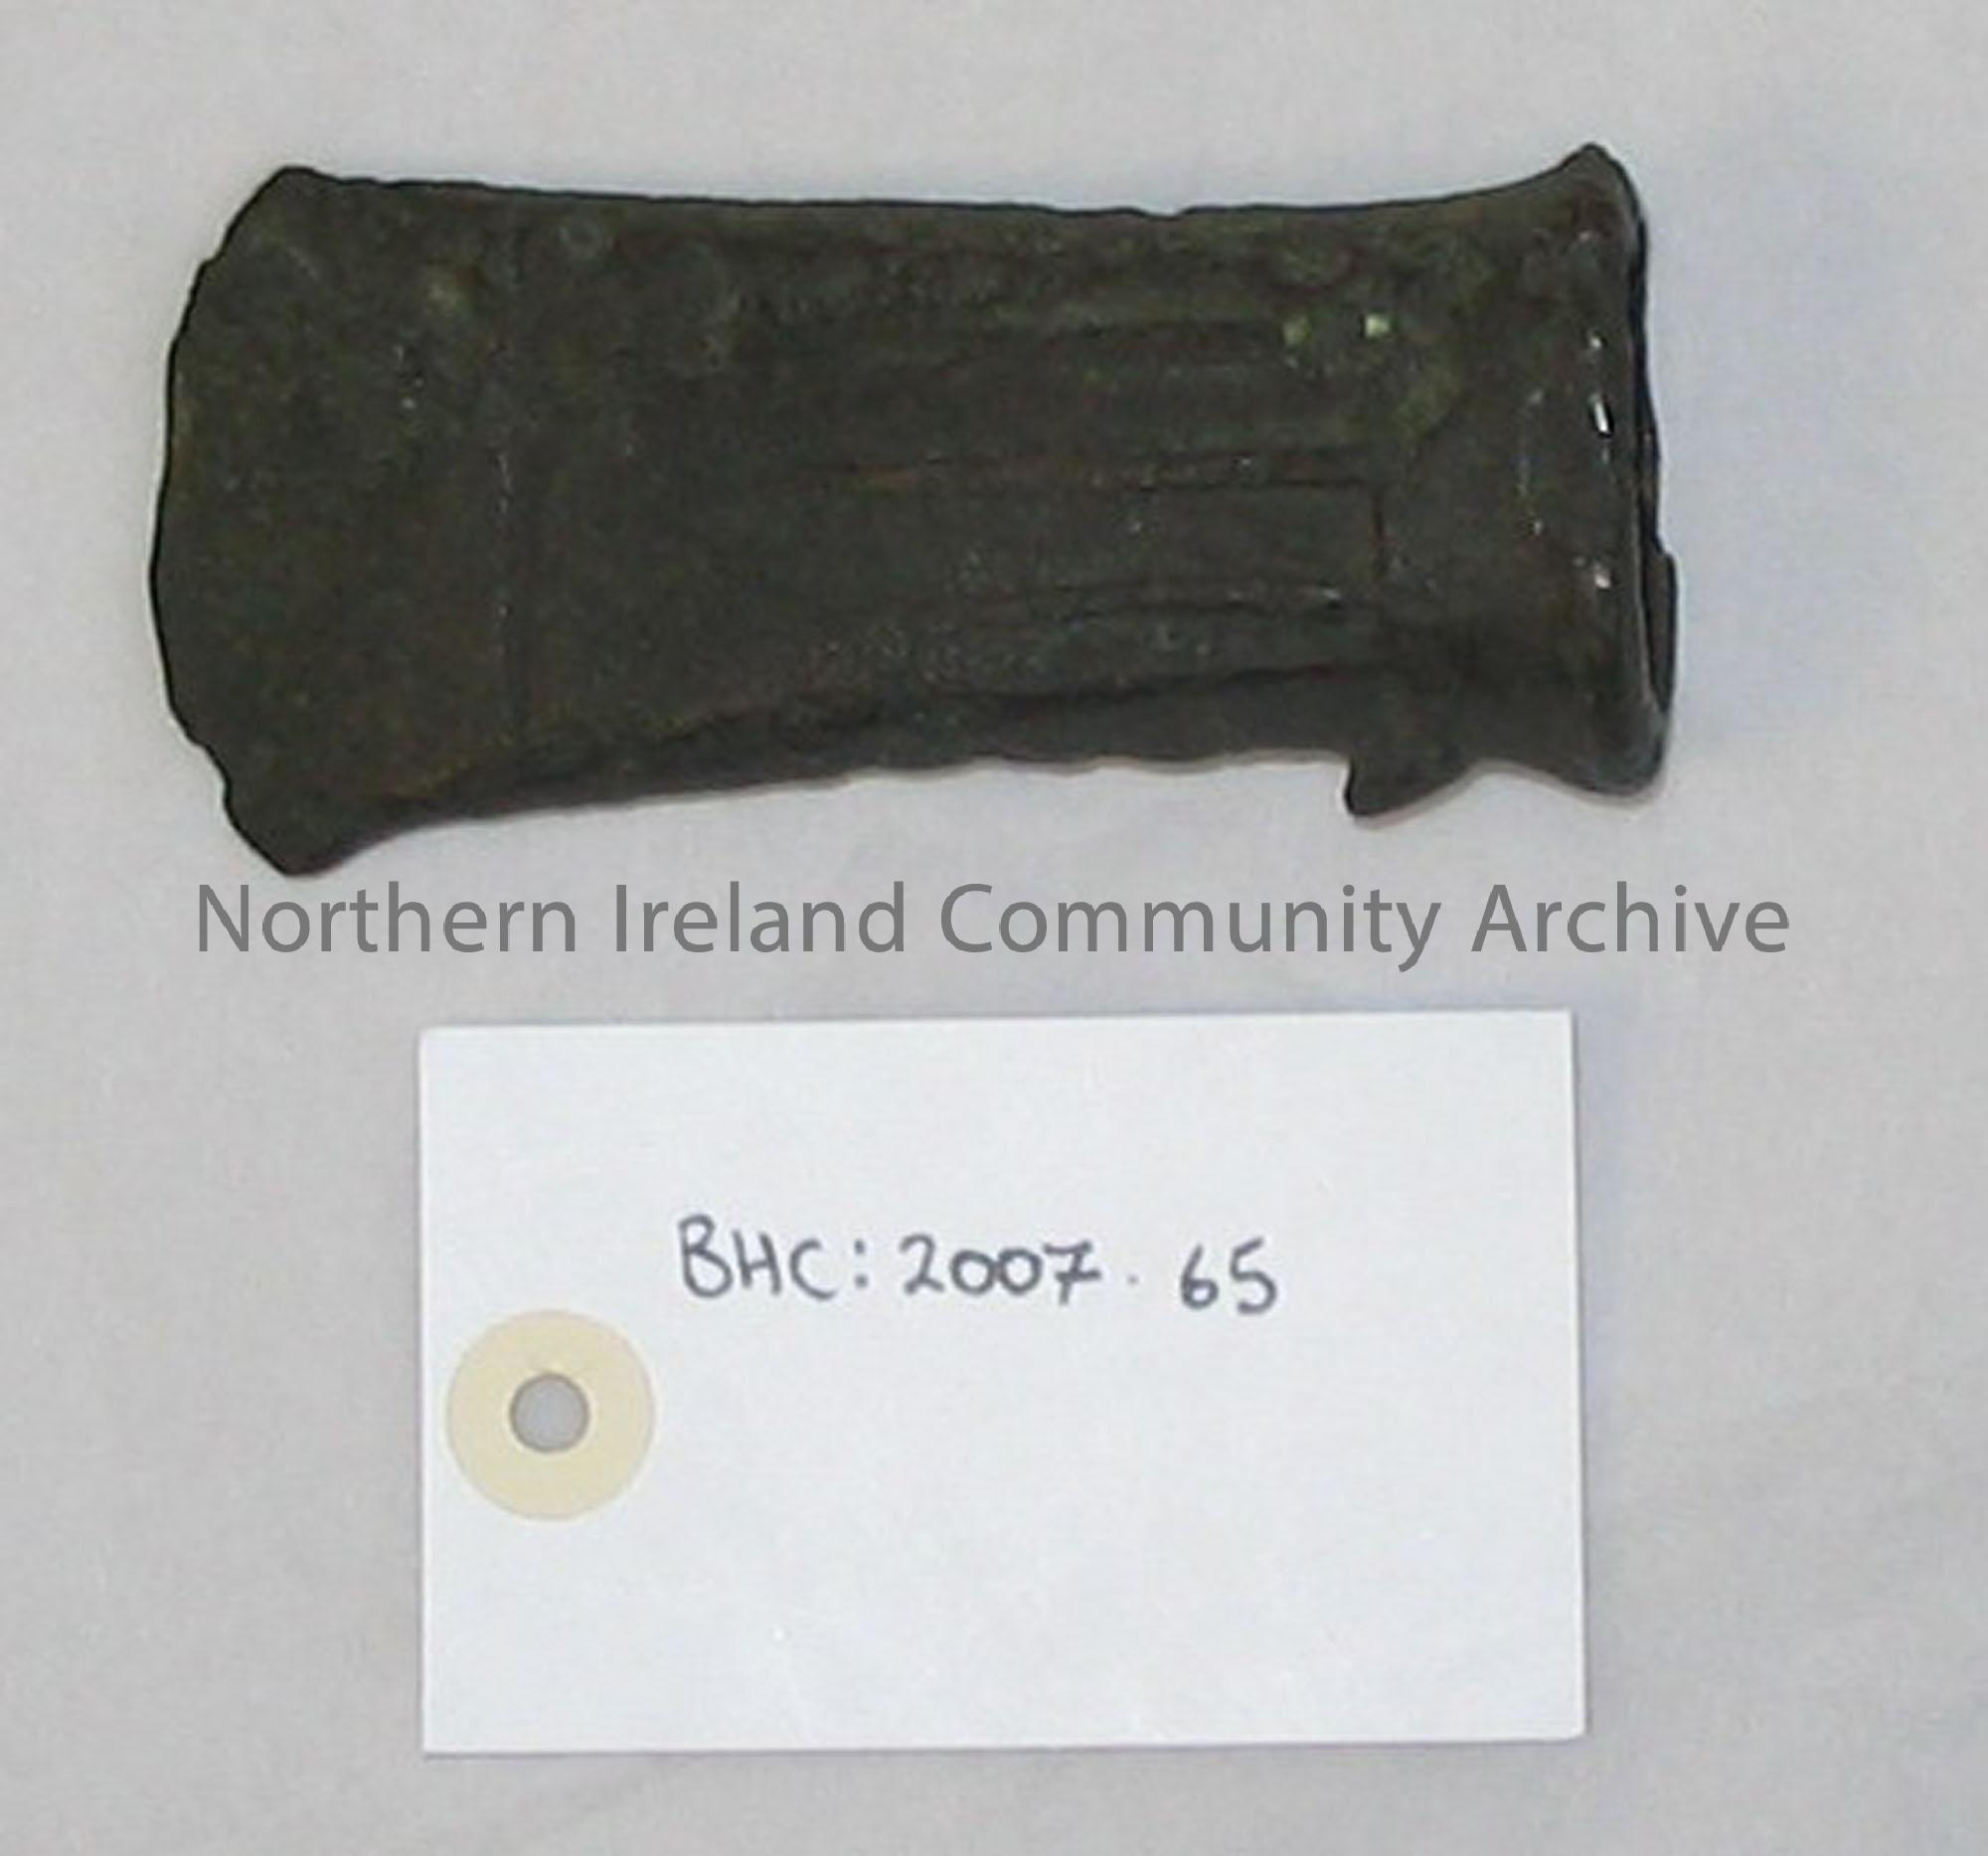 socketed axe, bronze. Found in Co. Antrim by members of the donor’s family